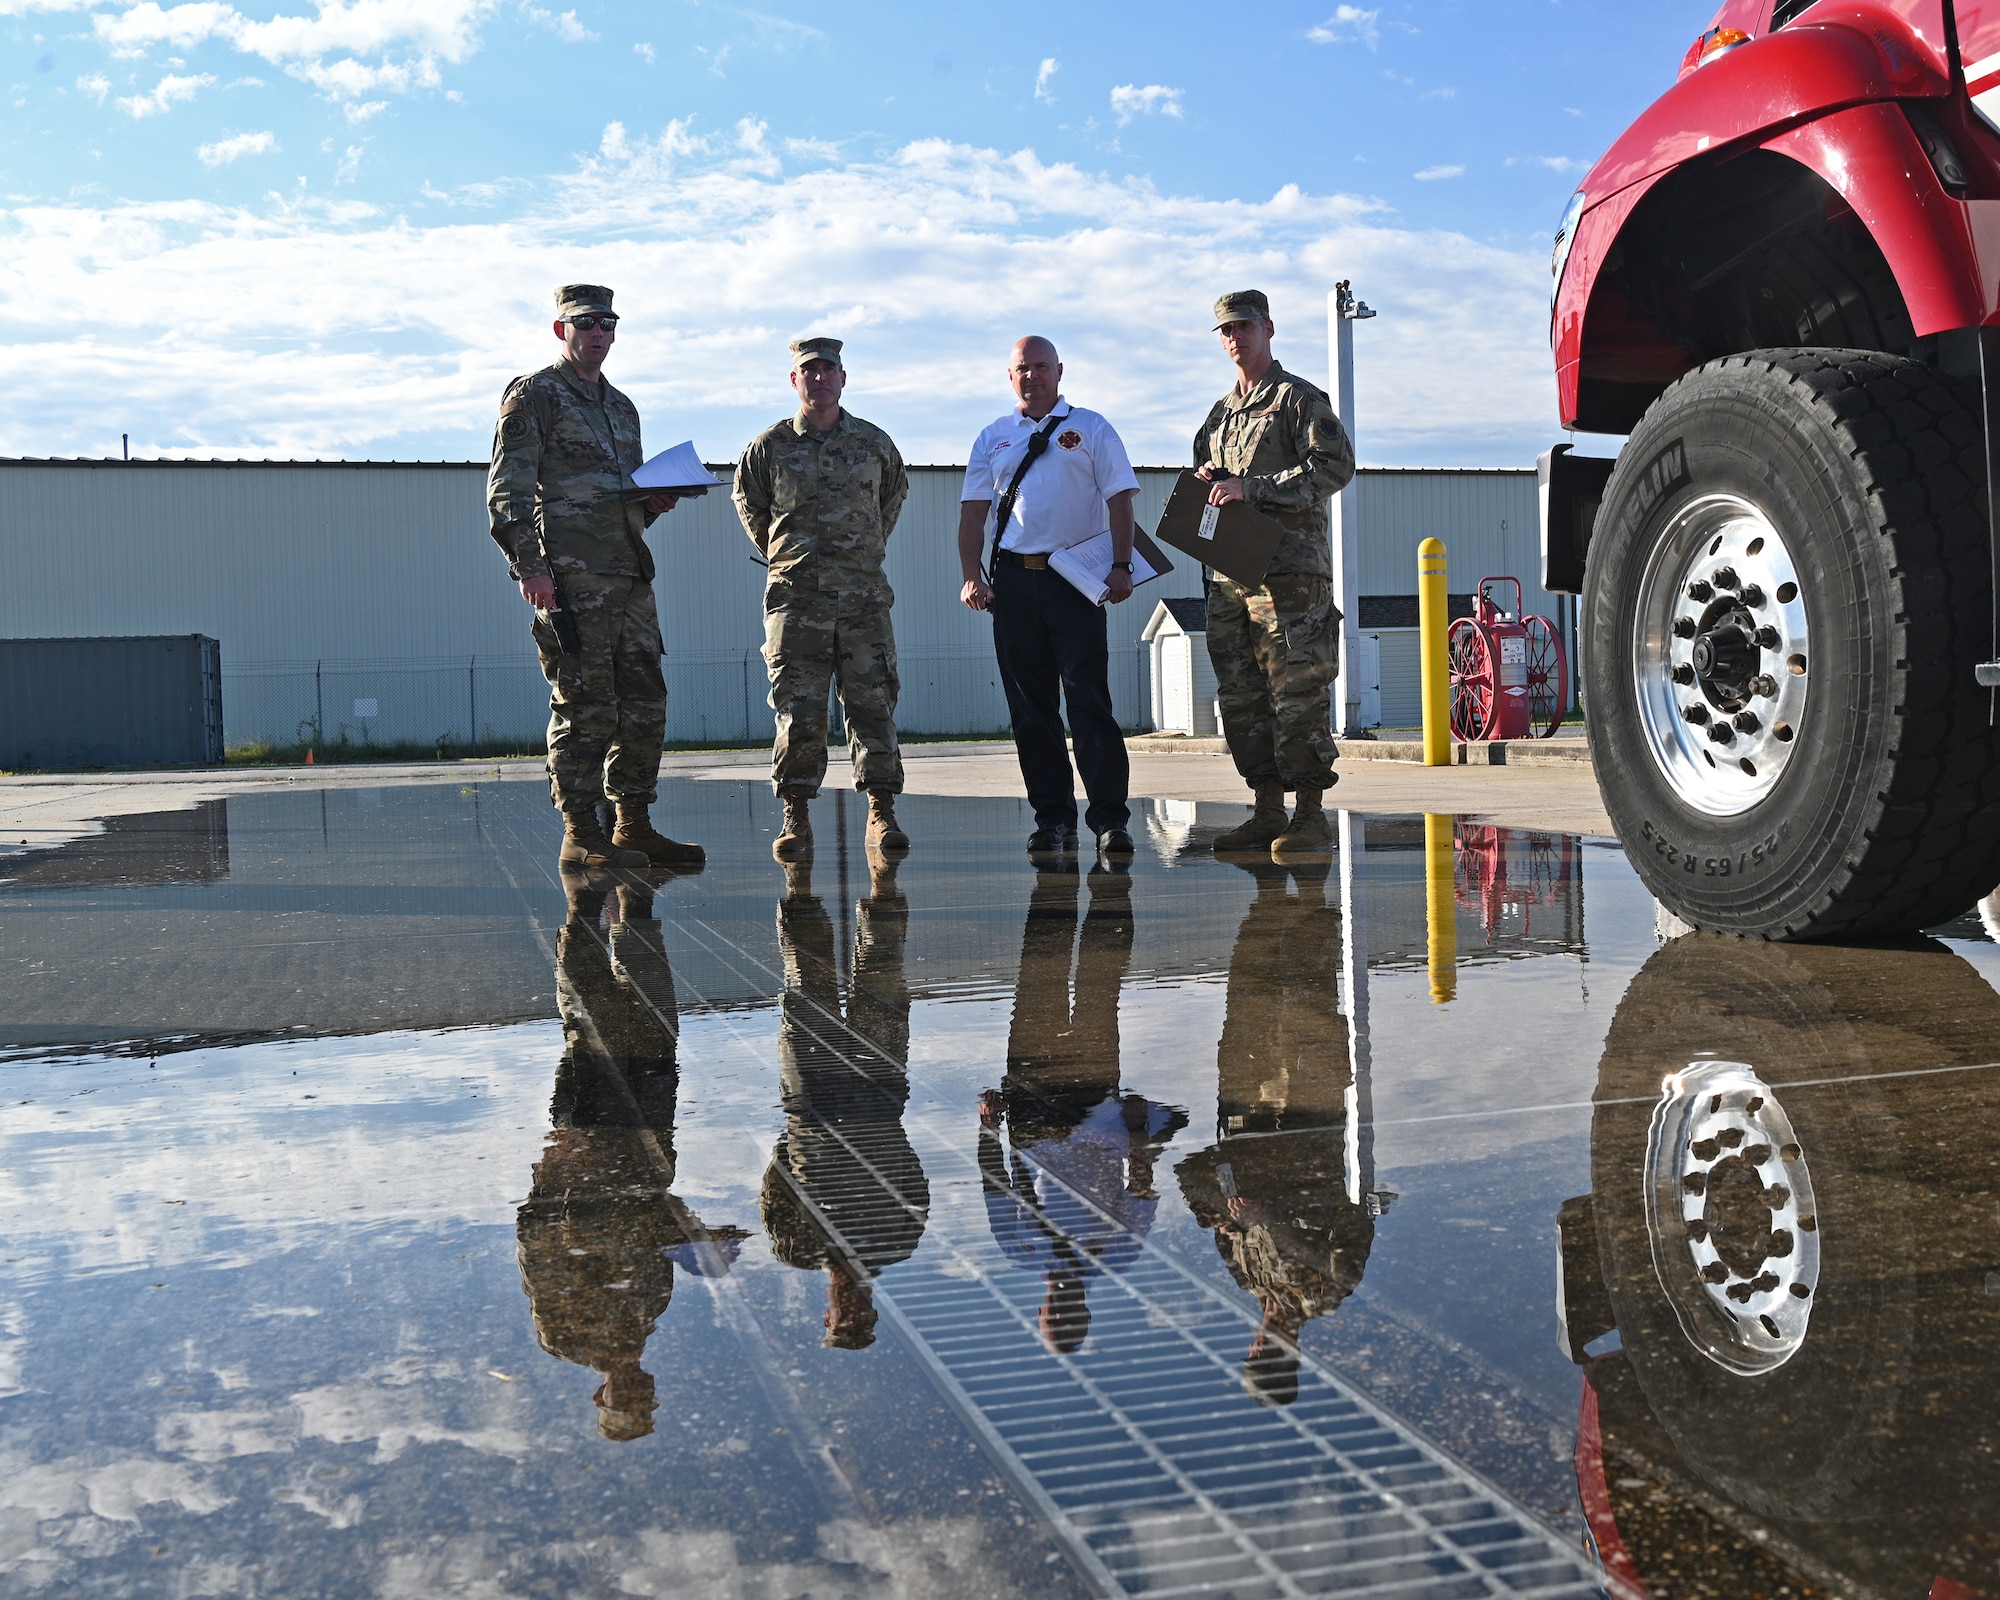 Members of the Mission Assurance Exercise inspection team observe a simulated fuel spill during a Mission Assurance Exercise at Warfield Air National Guard Base at Martin State Airport, Middle River, Maryland, August 12, 2022.